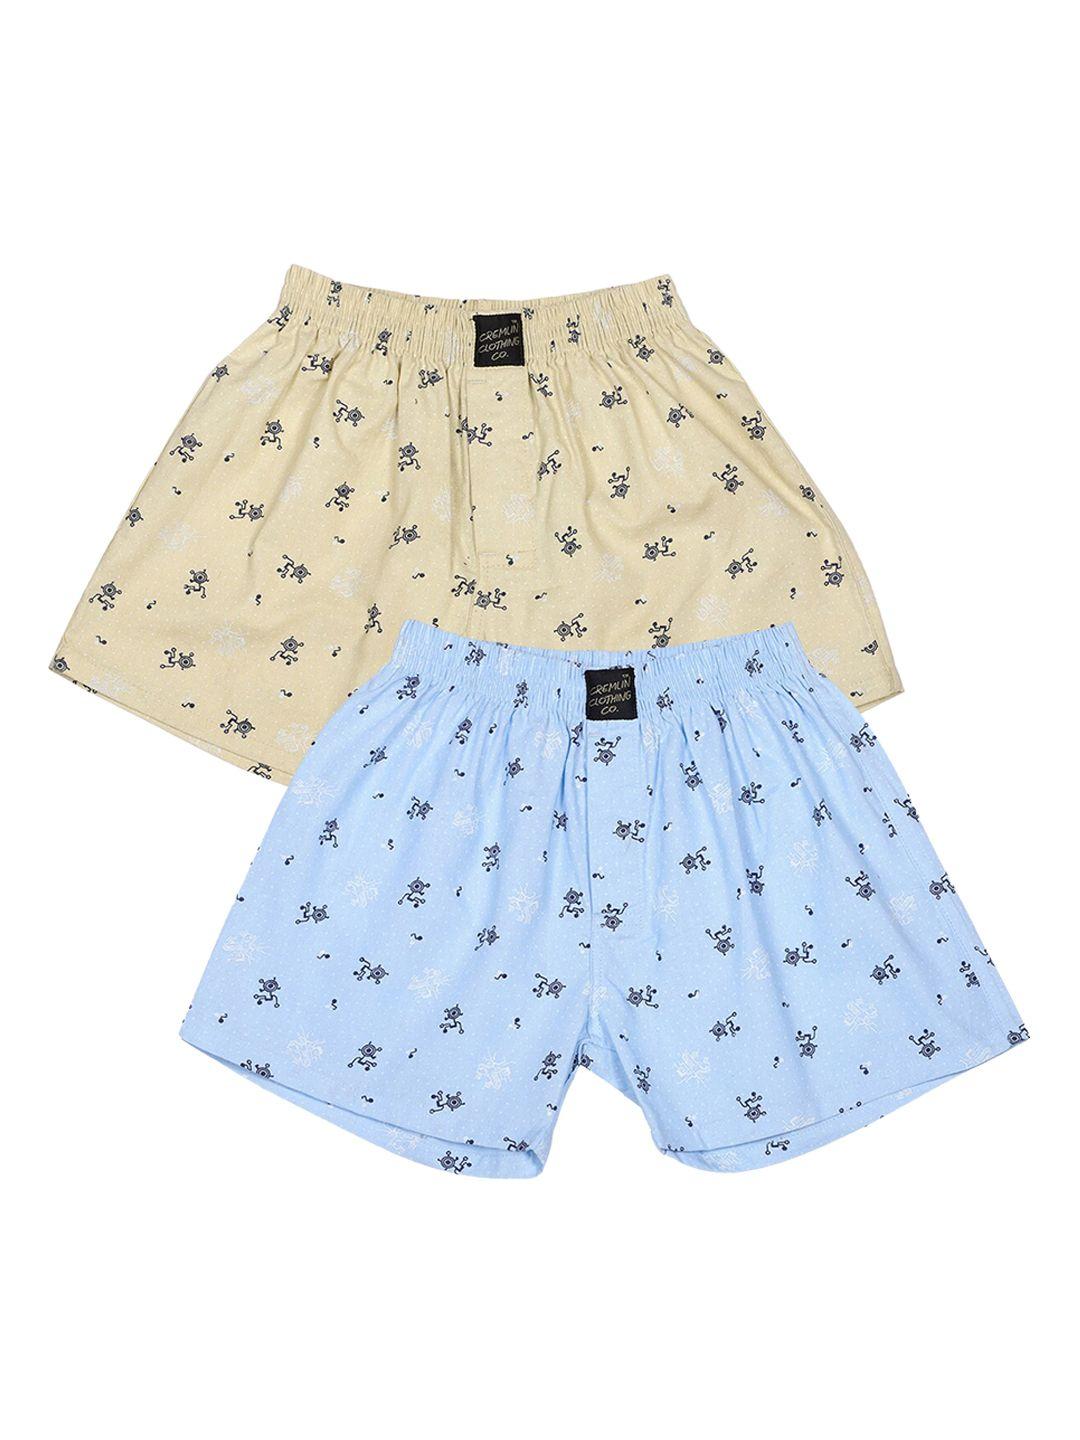 cremlin clothing boys pack of 2 yellow & blue printed cotton boxers